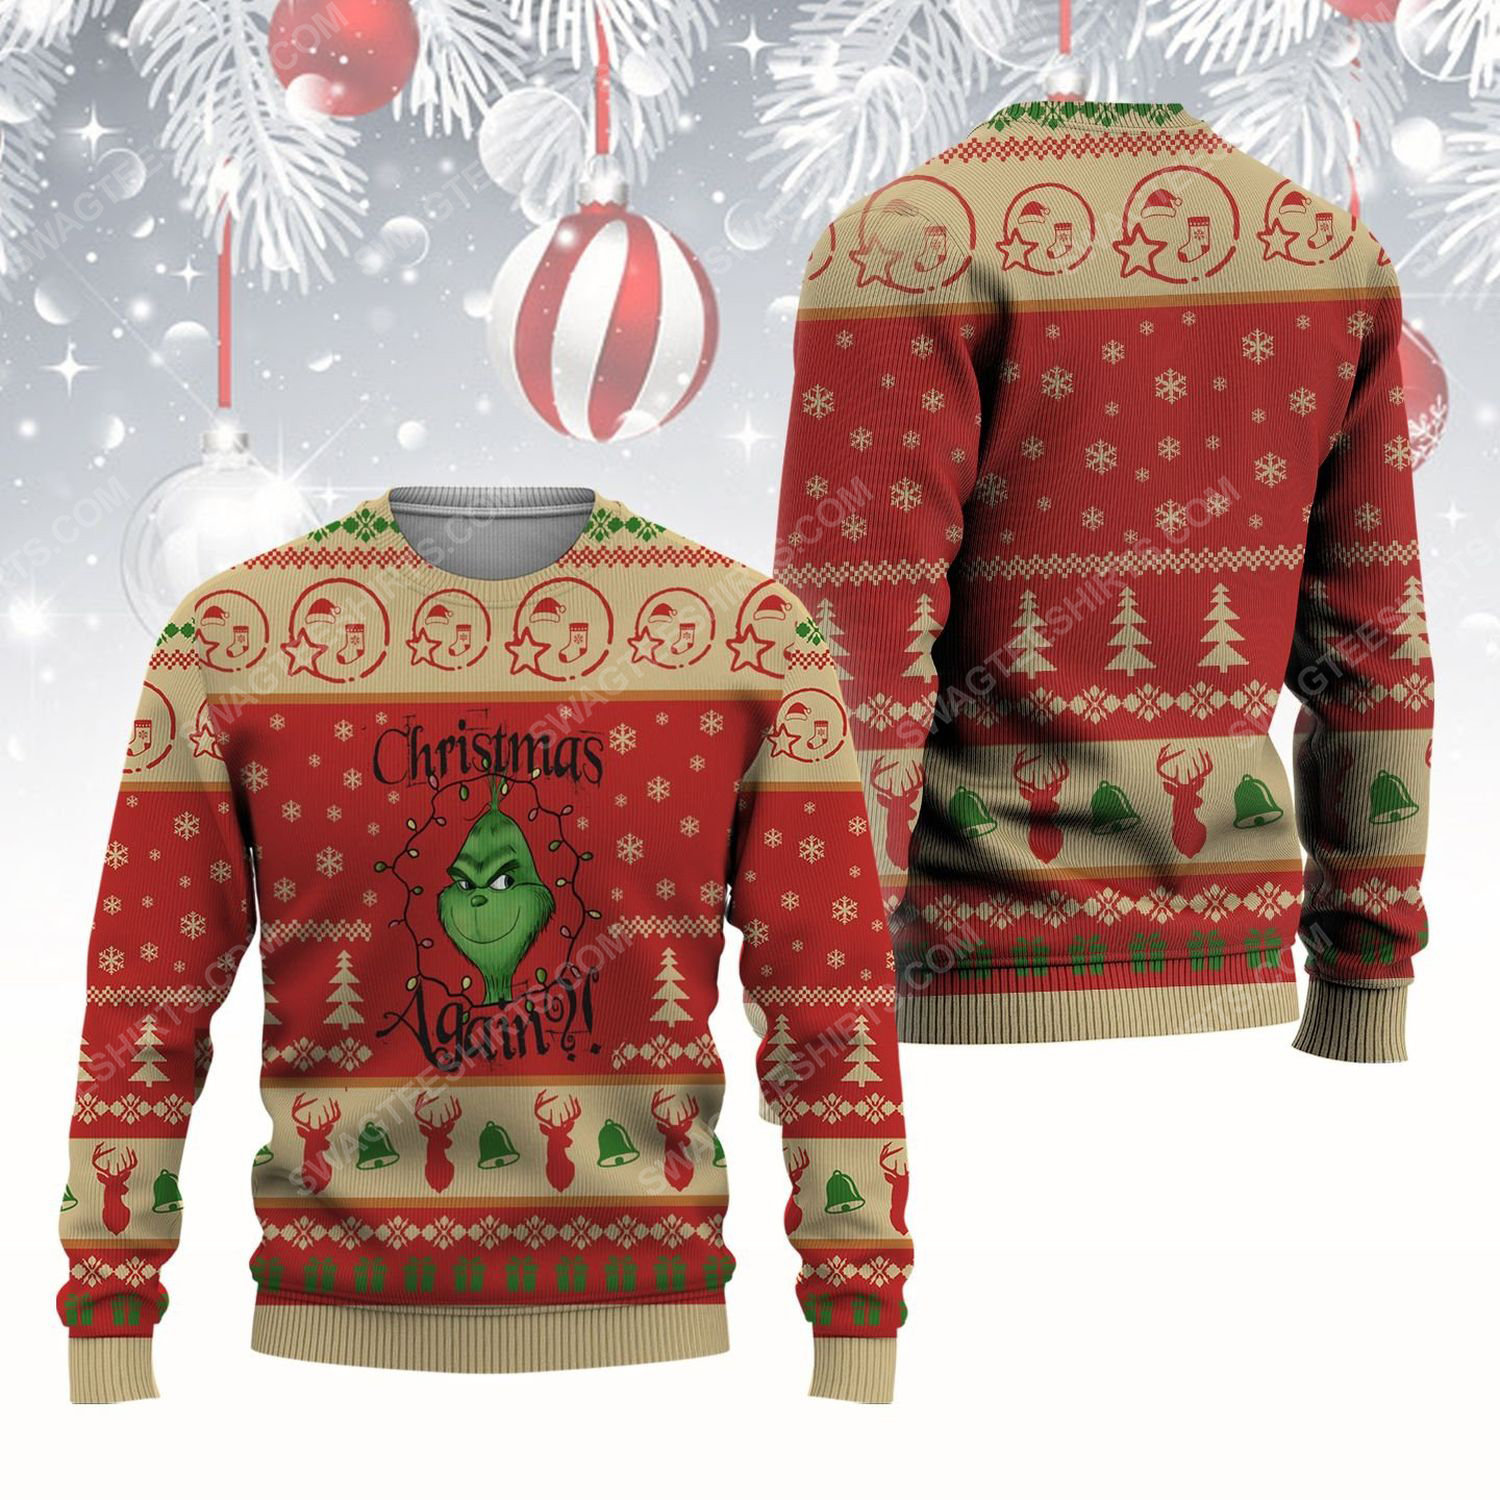 Christmas again the grinch ​ugly christmas sweater - Copy (2)